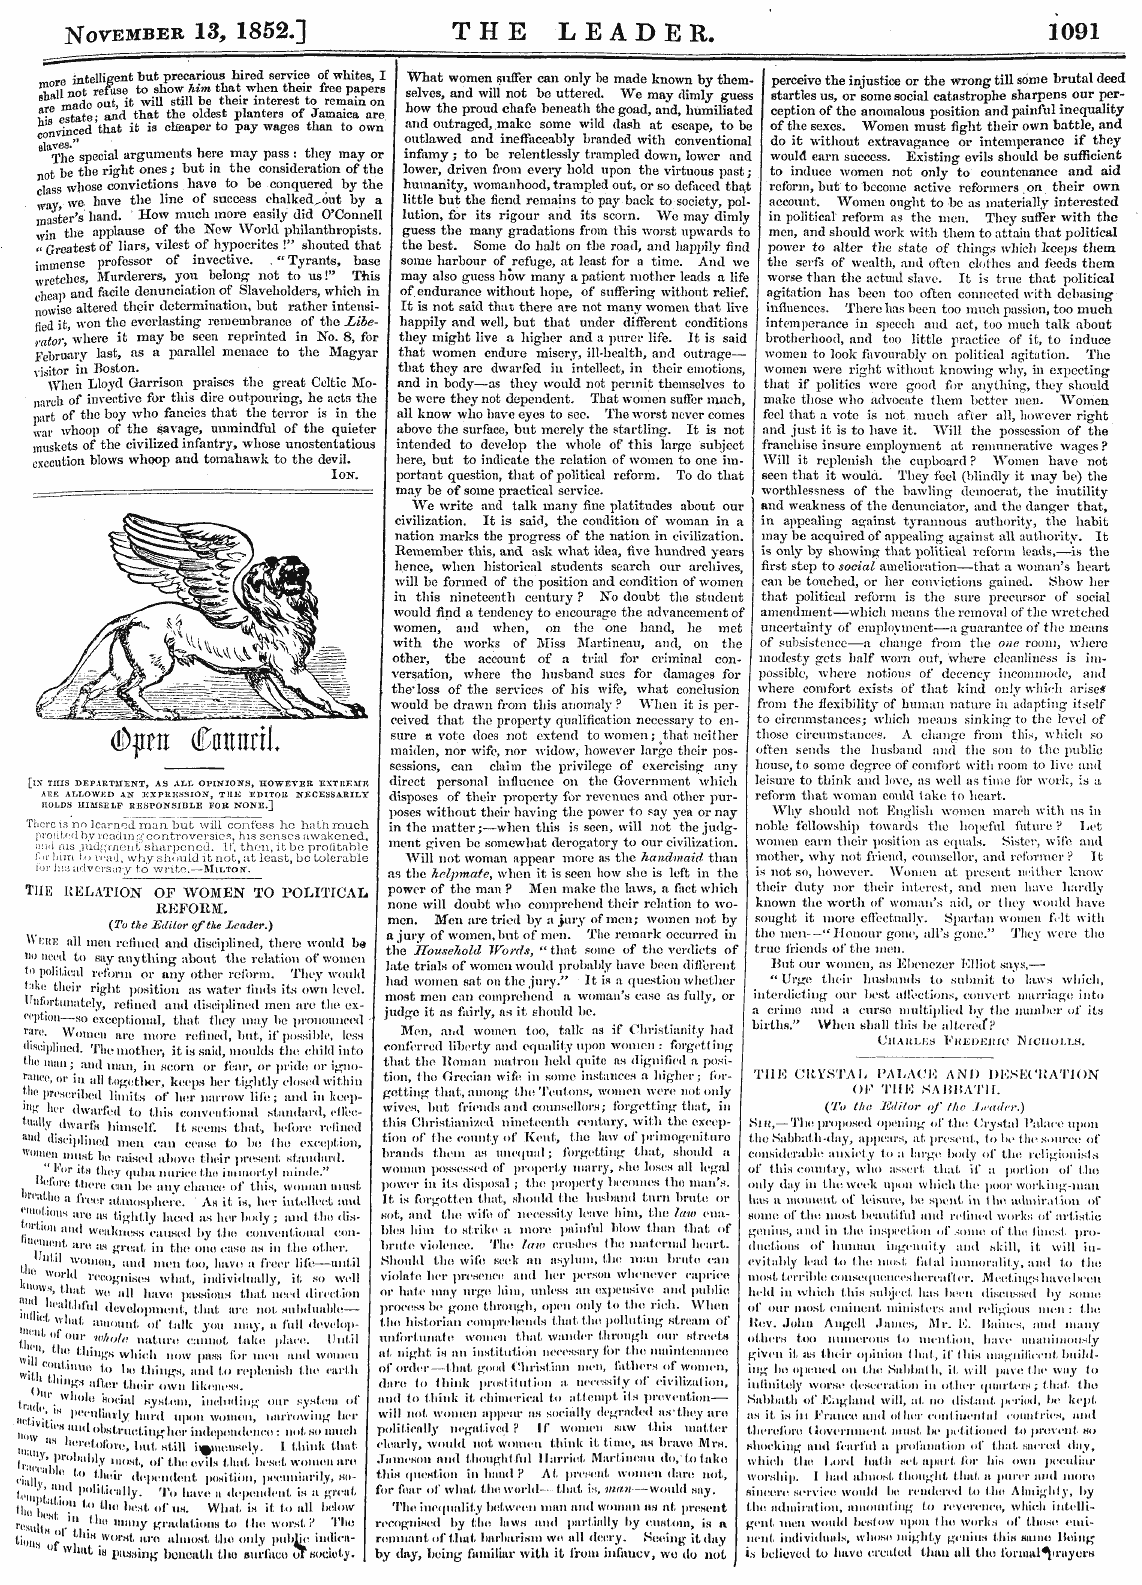 Leader (1850-1860): jS F Y, Country edition - November 13, 1852.] The Leader. 1091